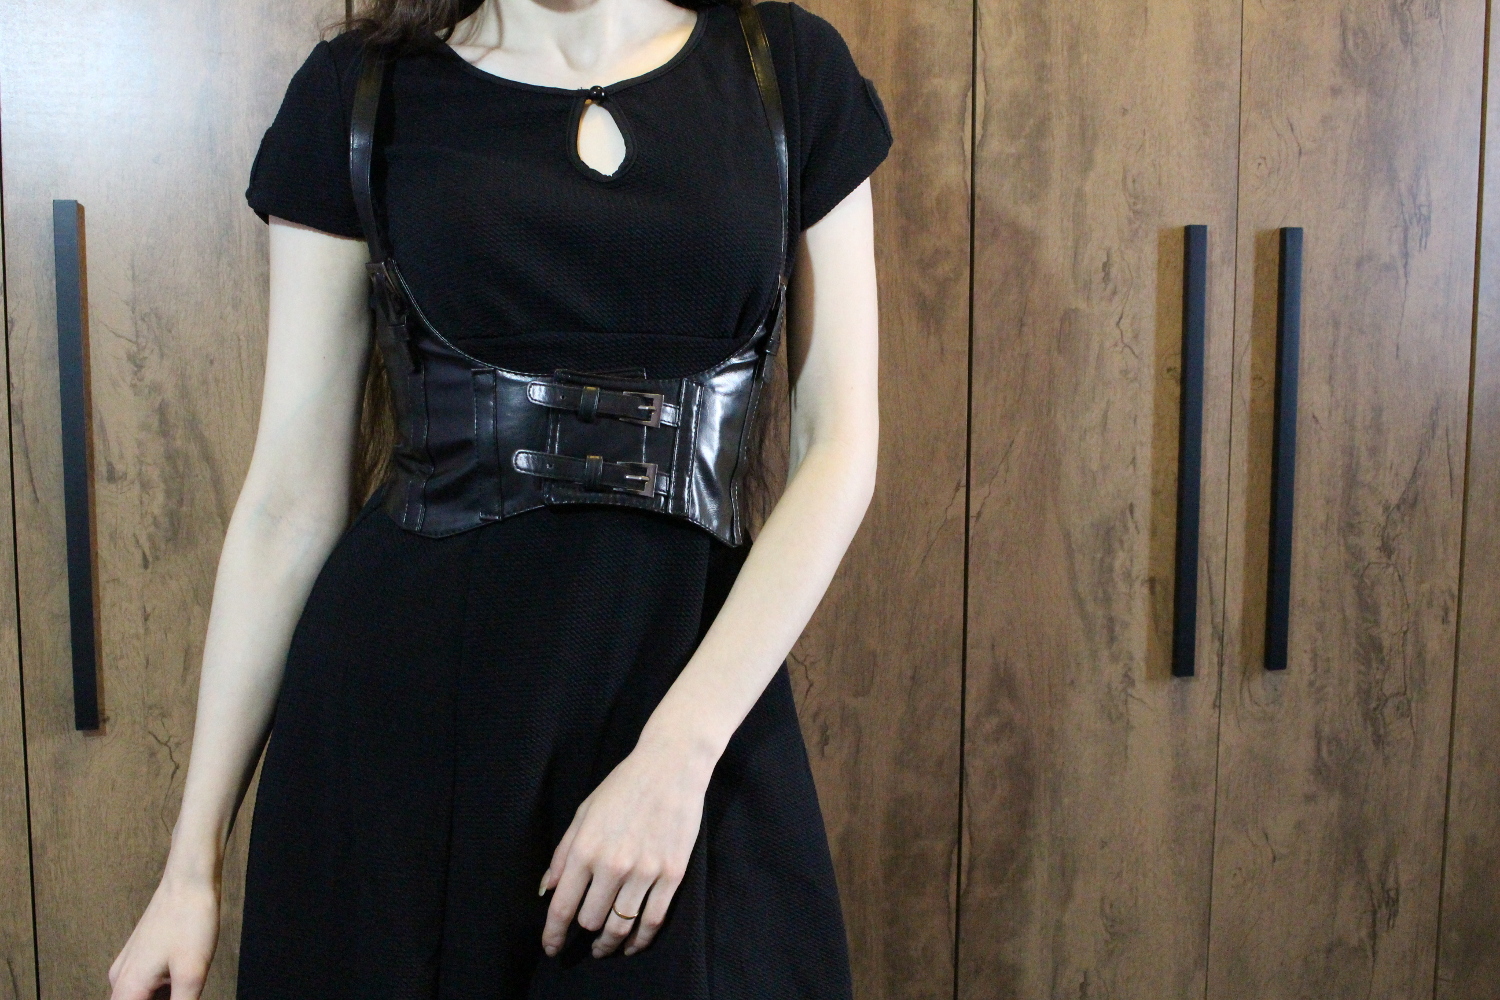 blogger Liz Breygel demonstrates a simple, everyday gothic outfit with a corset belt and black vintage-loooking dress